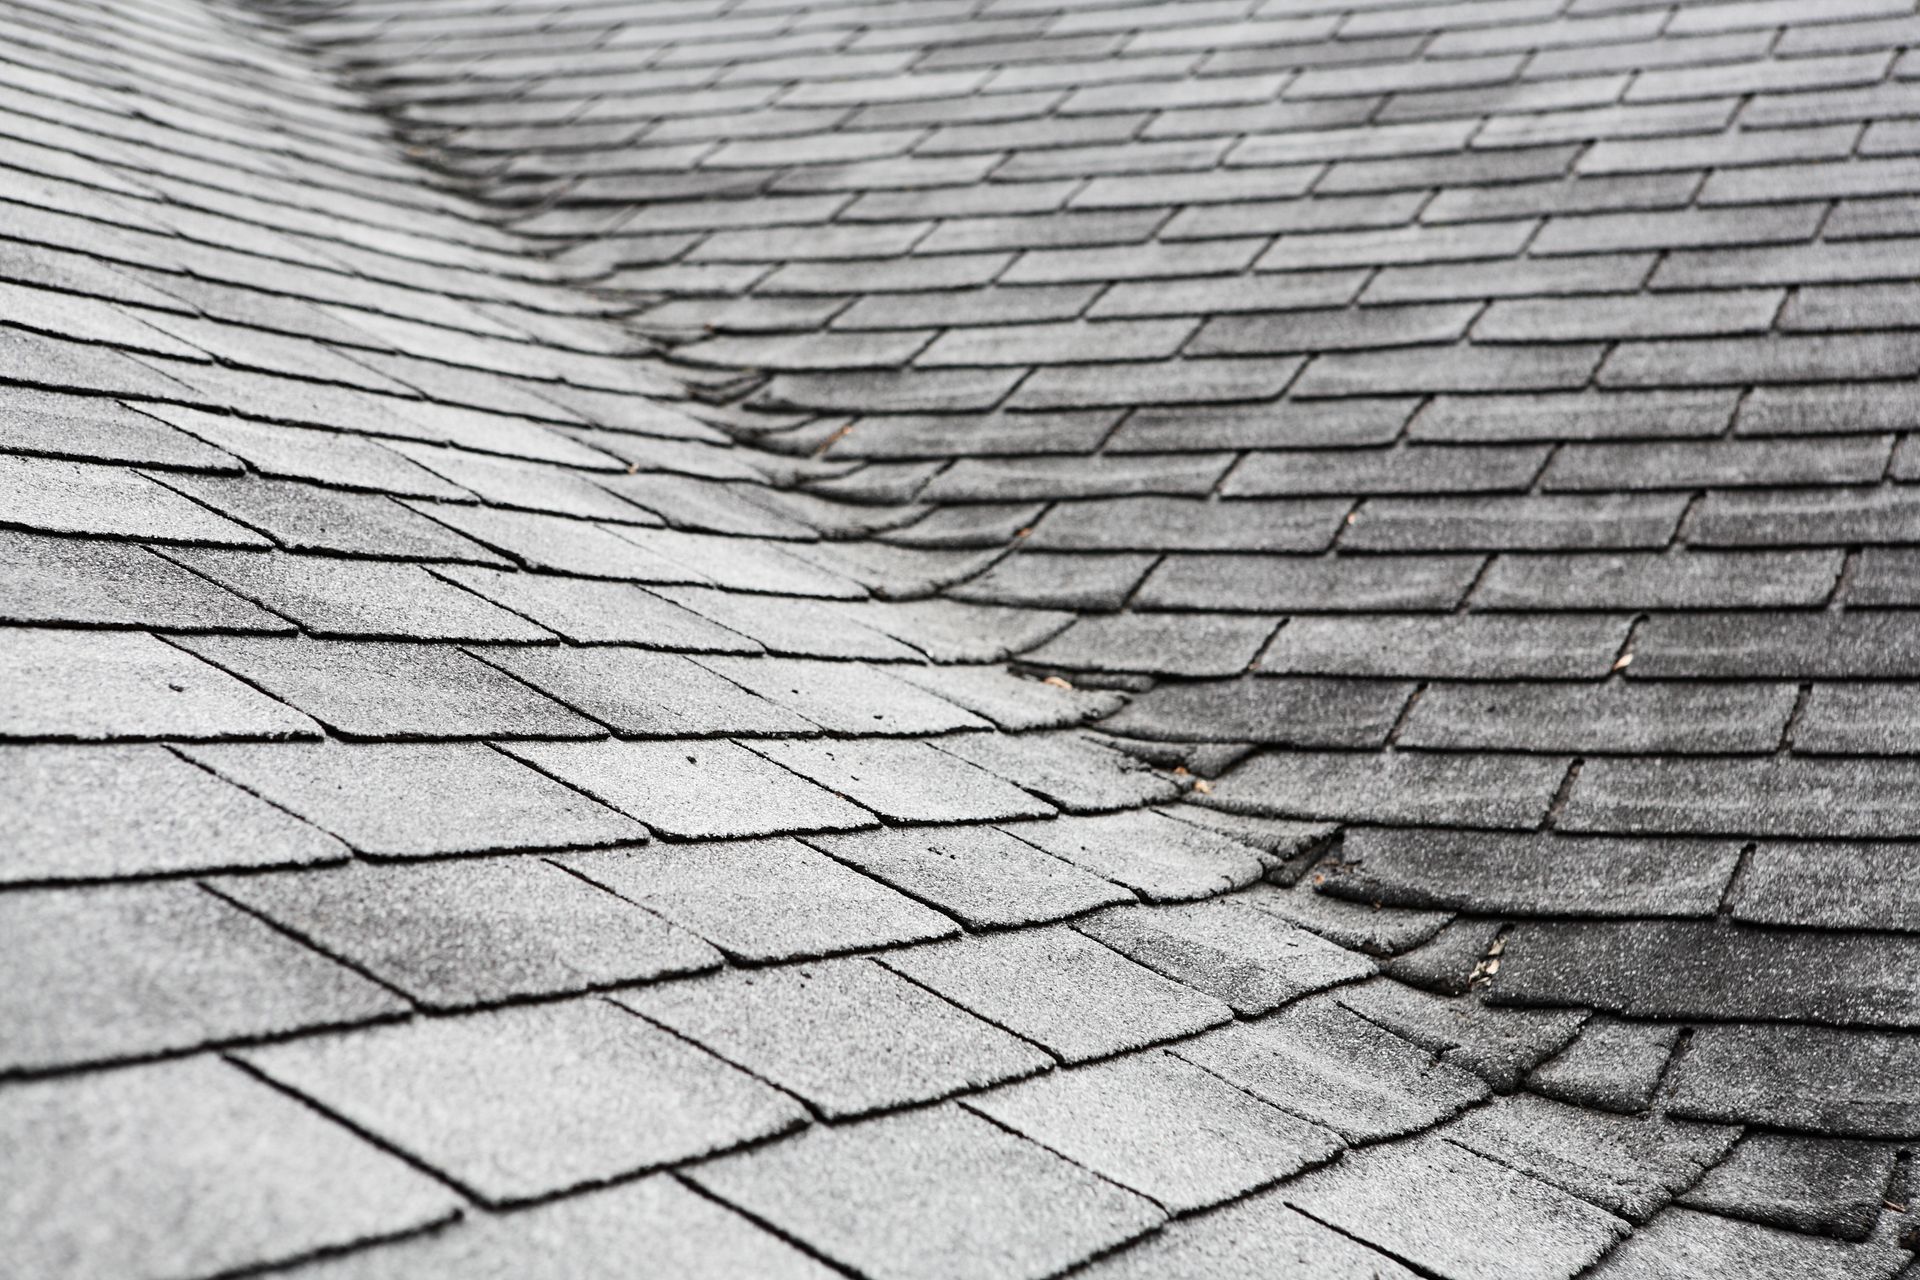 A black and white photo of a roof with shingles on it.